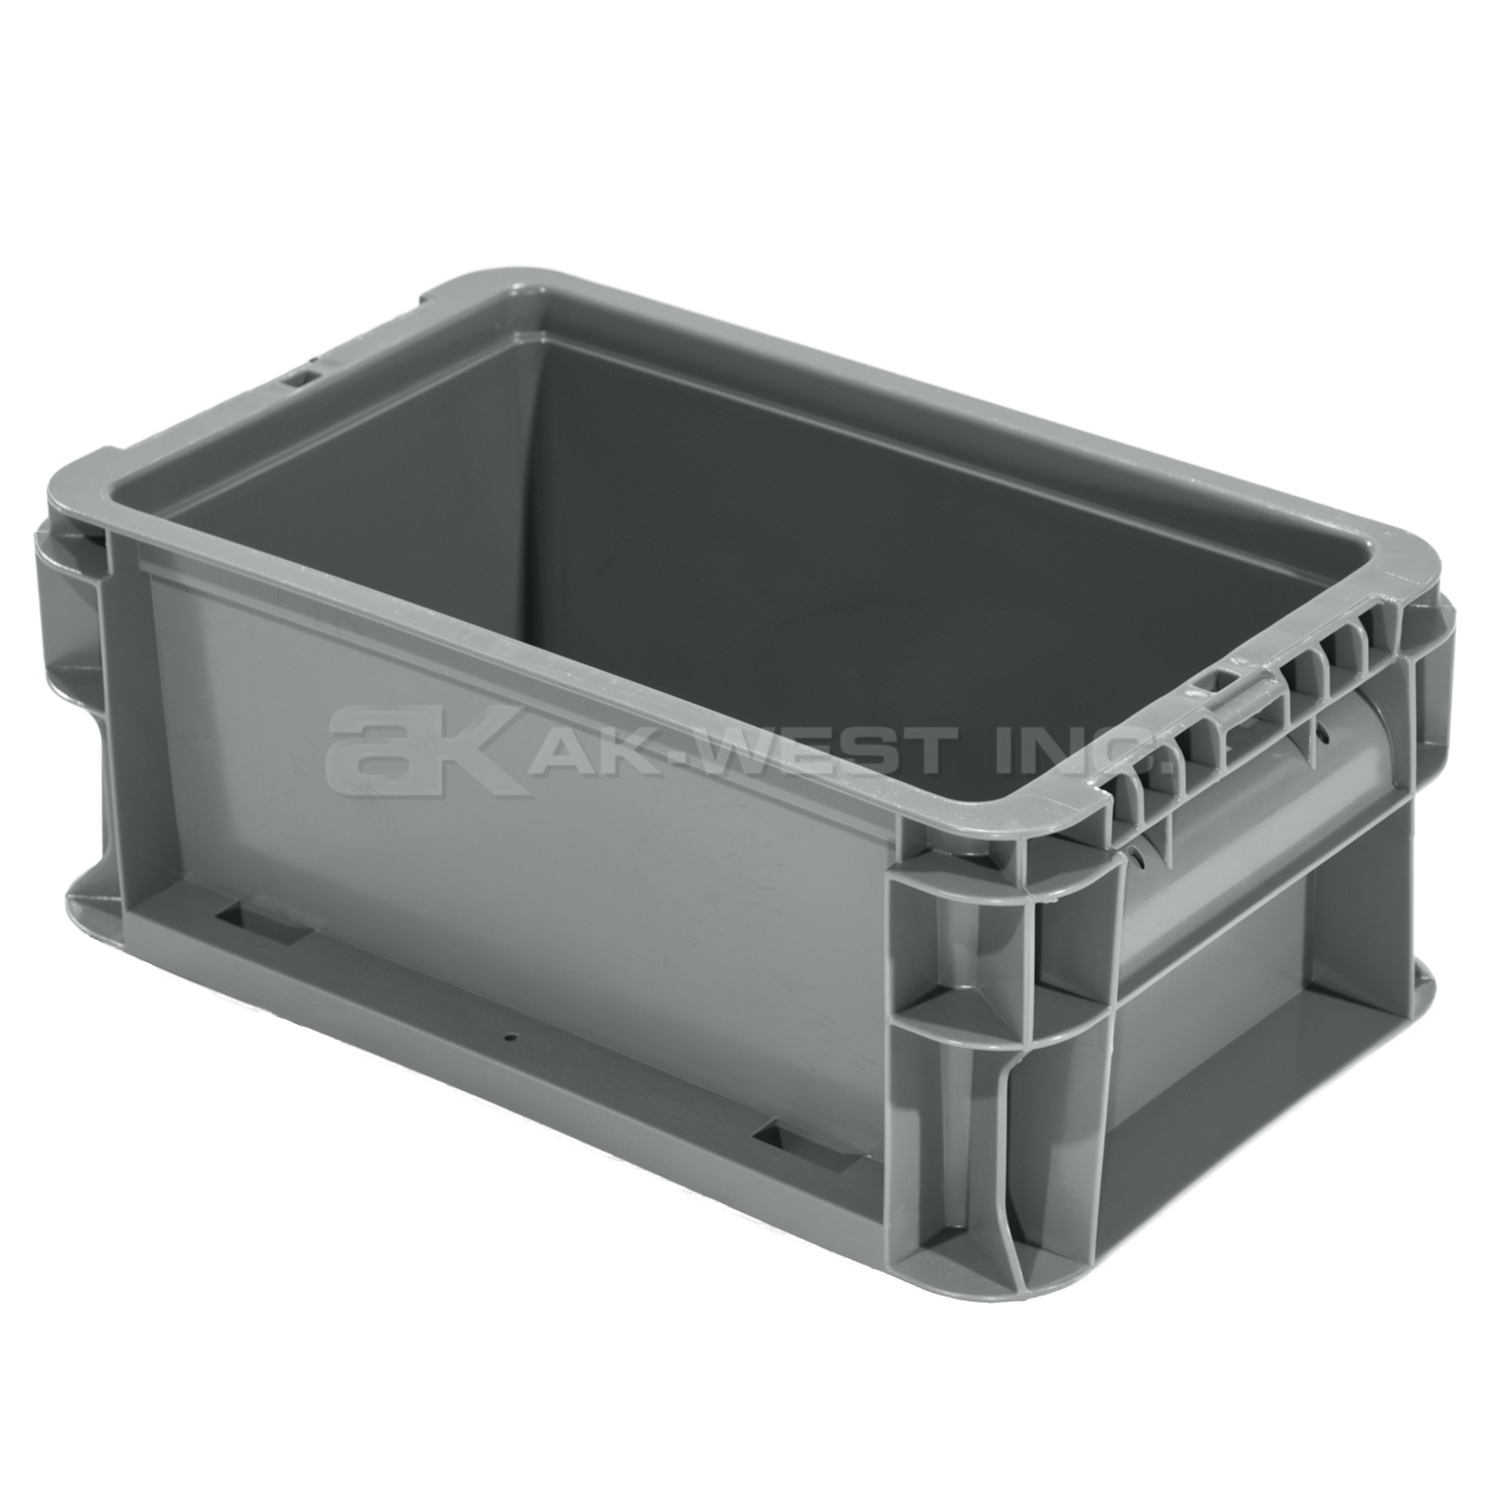 Grey, 12" x 7" x 5", Straight Wall Container